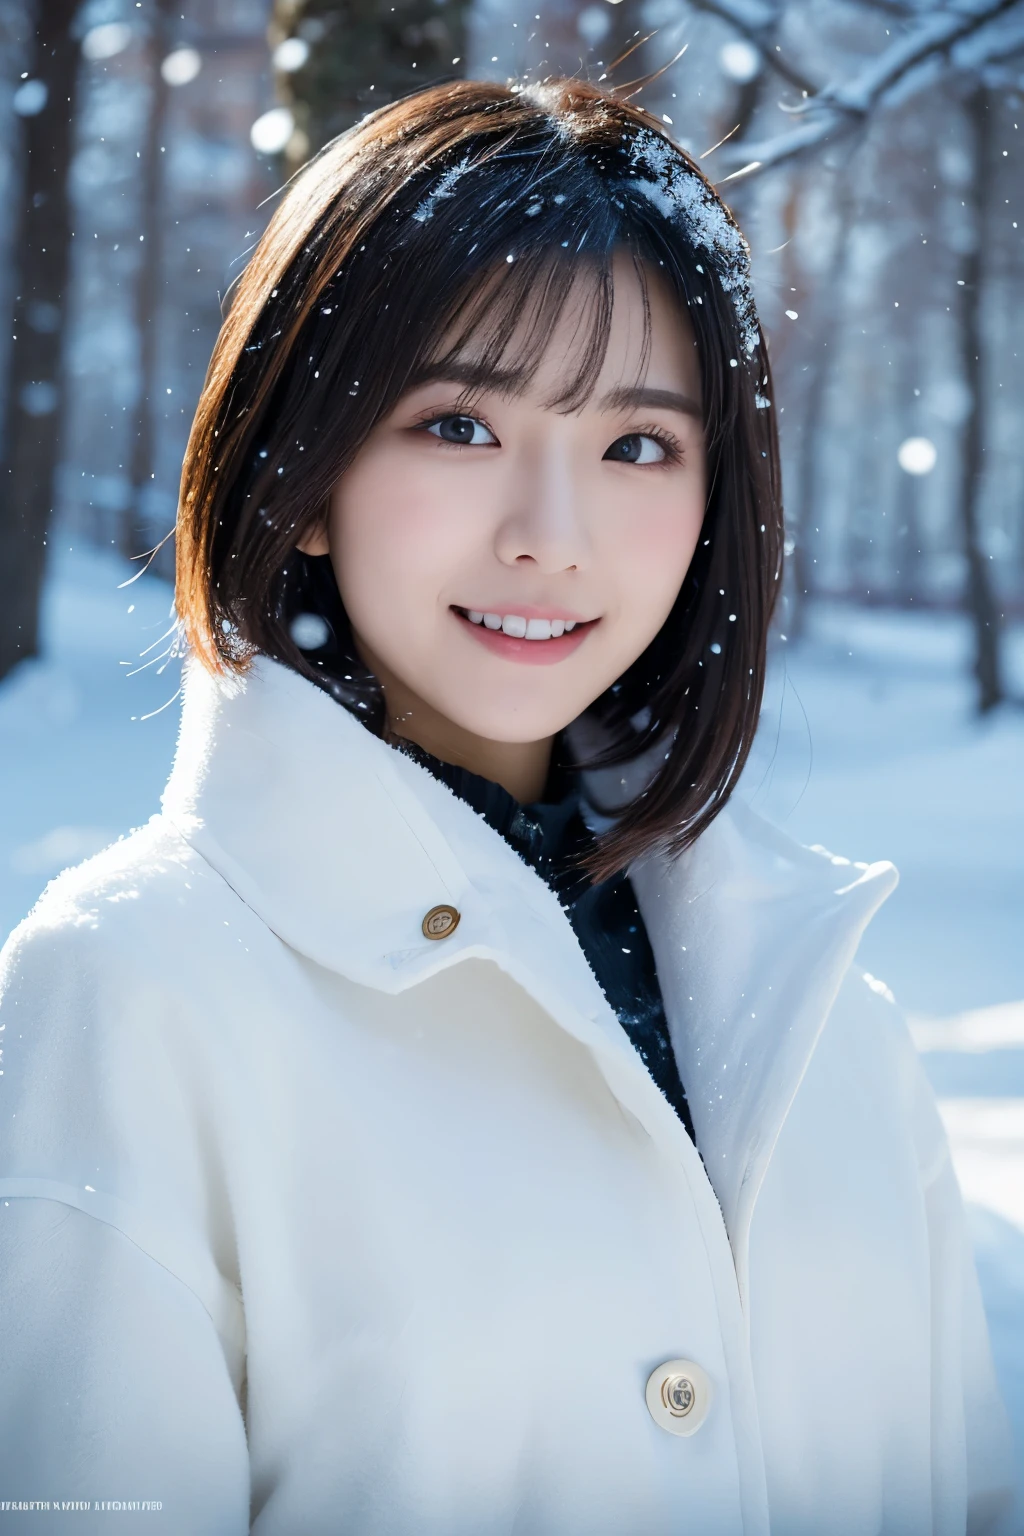 1girl in, (White winter clothes:1.2), Japanese beautiful actress,
(Raw photo, Best Quality), (Realistic, Photorealsitic:1.4), (masutepiece), 
Extremely delicate and beautiful, Extremely detailed, 2k wallpaper, amazing, finely detail, the Extremely Detailed CG Unity 8K Wallpapers, Ultra-detailed, hight resolution, 
Soft light, Beautiful detailed girl, extremely detailed eye and face, beautiful detailed nose, Beautiful detailed eyes, Cinematic lighting, 
winter forest snowfall landscape,  snow is falling rapidly, Frosty tree々, The background is hazy due to snowfall,
Perfect Anatomy, Slender body, Small, short-hair, Smiling